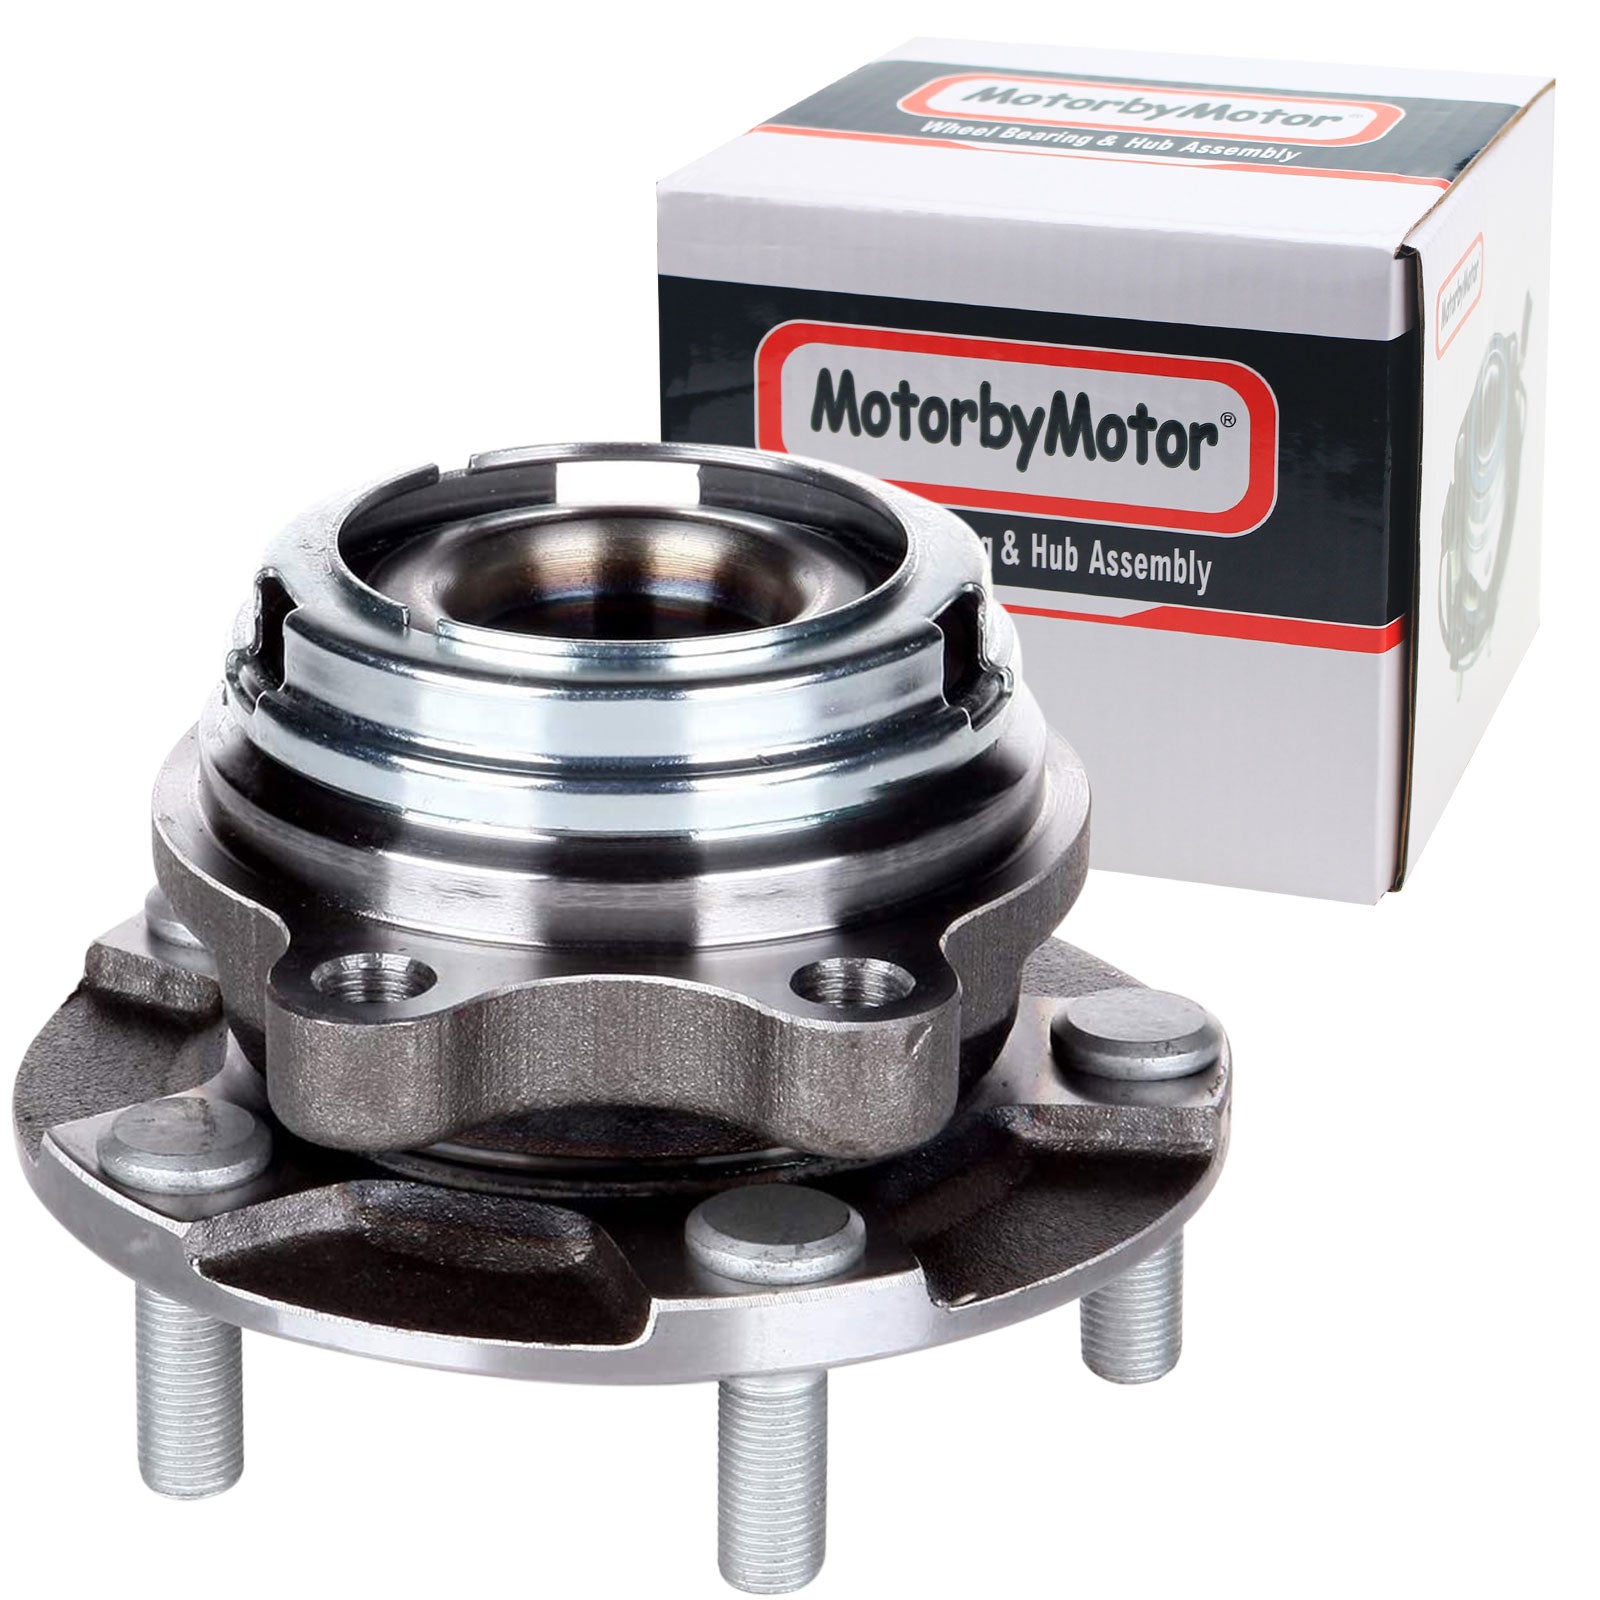 MotorbyMotor 513307 Front Right Side Wheel Bearing Hub Assembly with 5 Lugs Fits for Nissan Murano 2009-2014, Nissan Quest 2011 (w/ABS) Low-Runout Hub Bearing MotorbyMotor